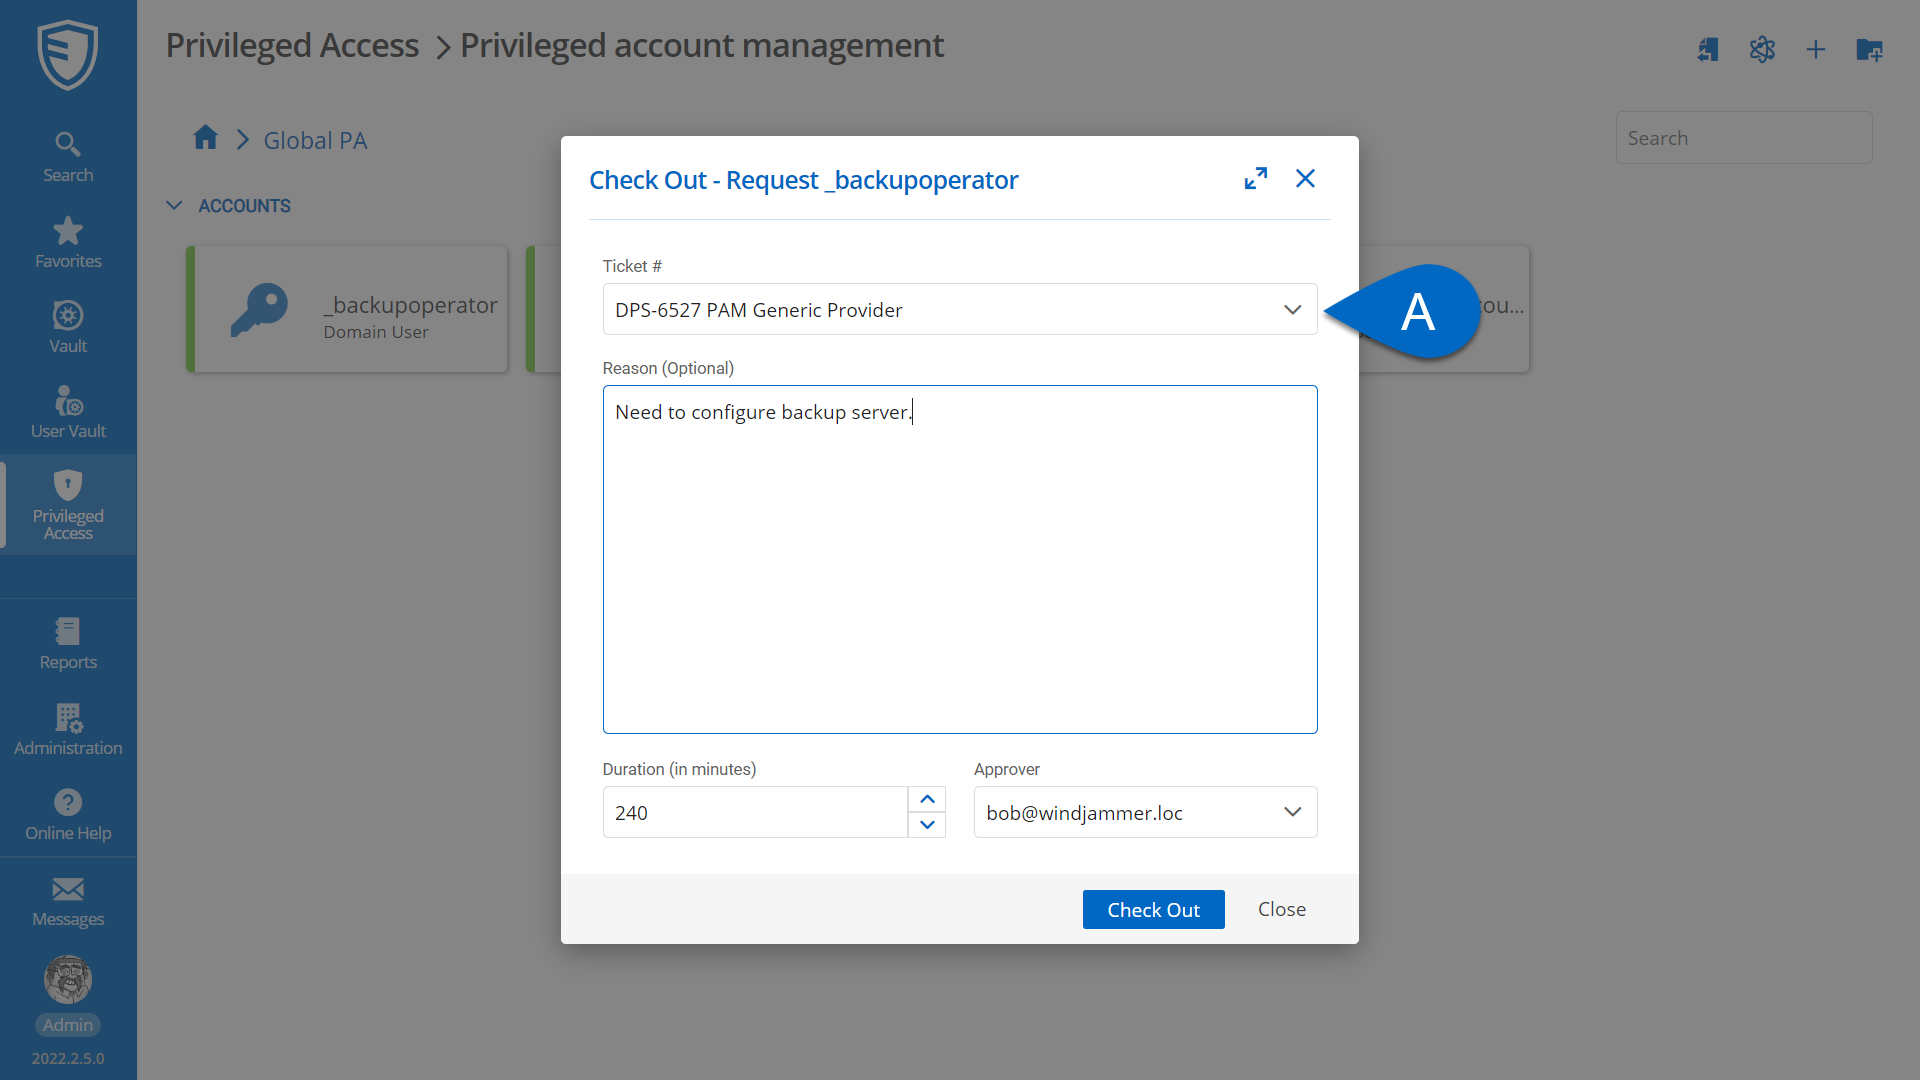 EN Jira Ticketing Service Integration at Checkout of Privileged Accounts.png